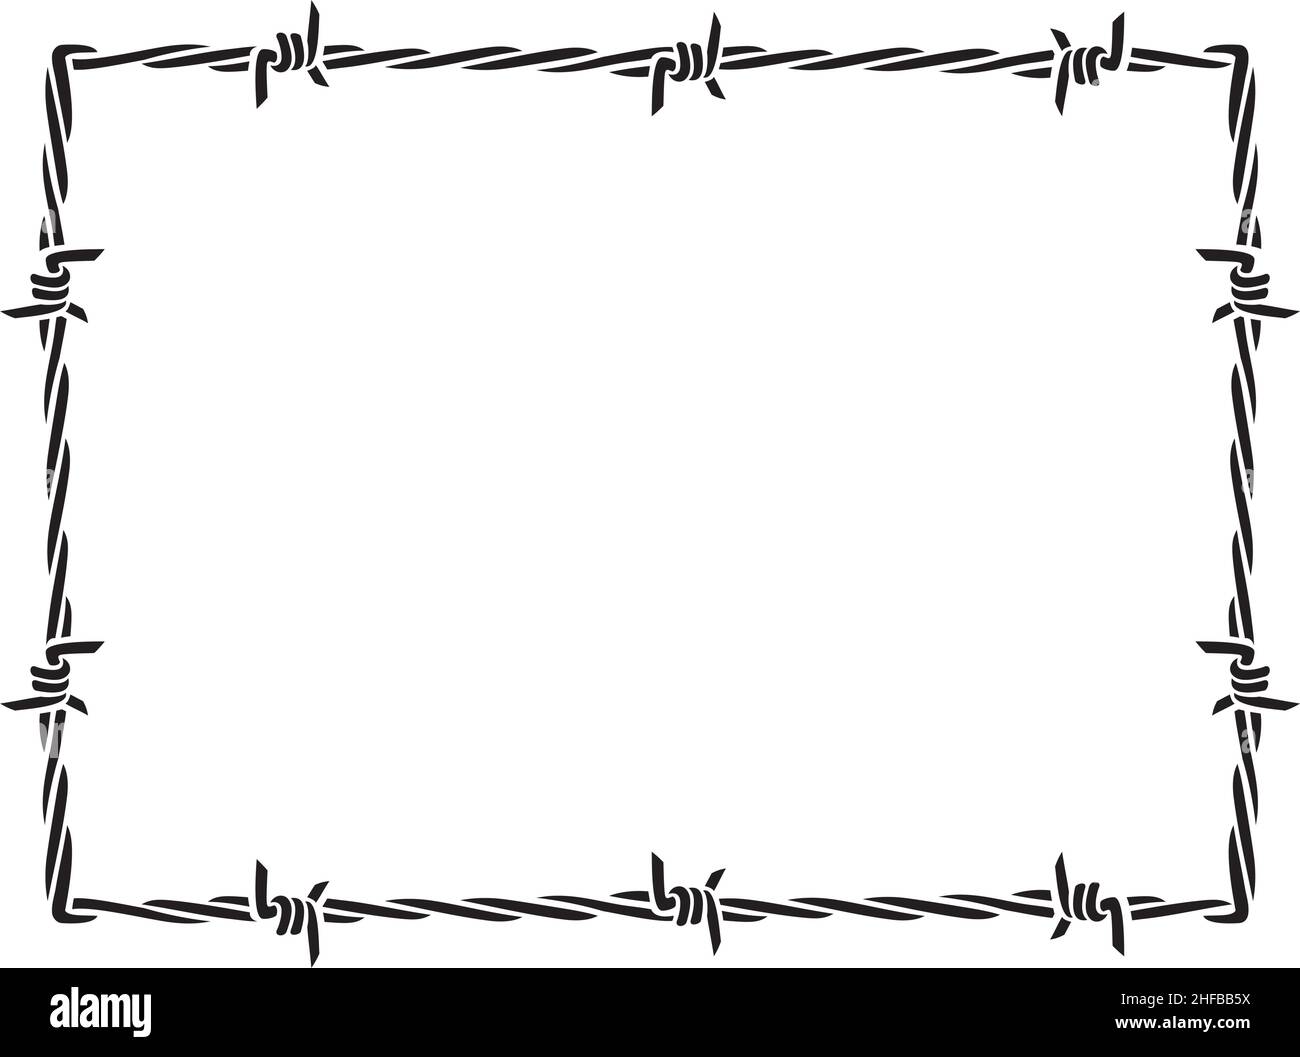 Barbed wire frame (border) vector illustration Stock Vector